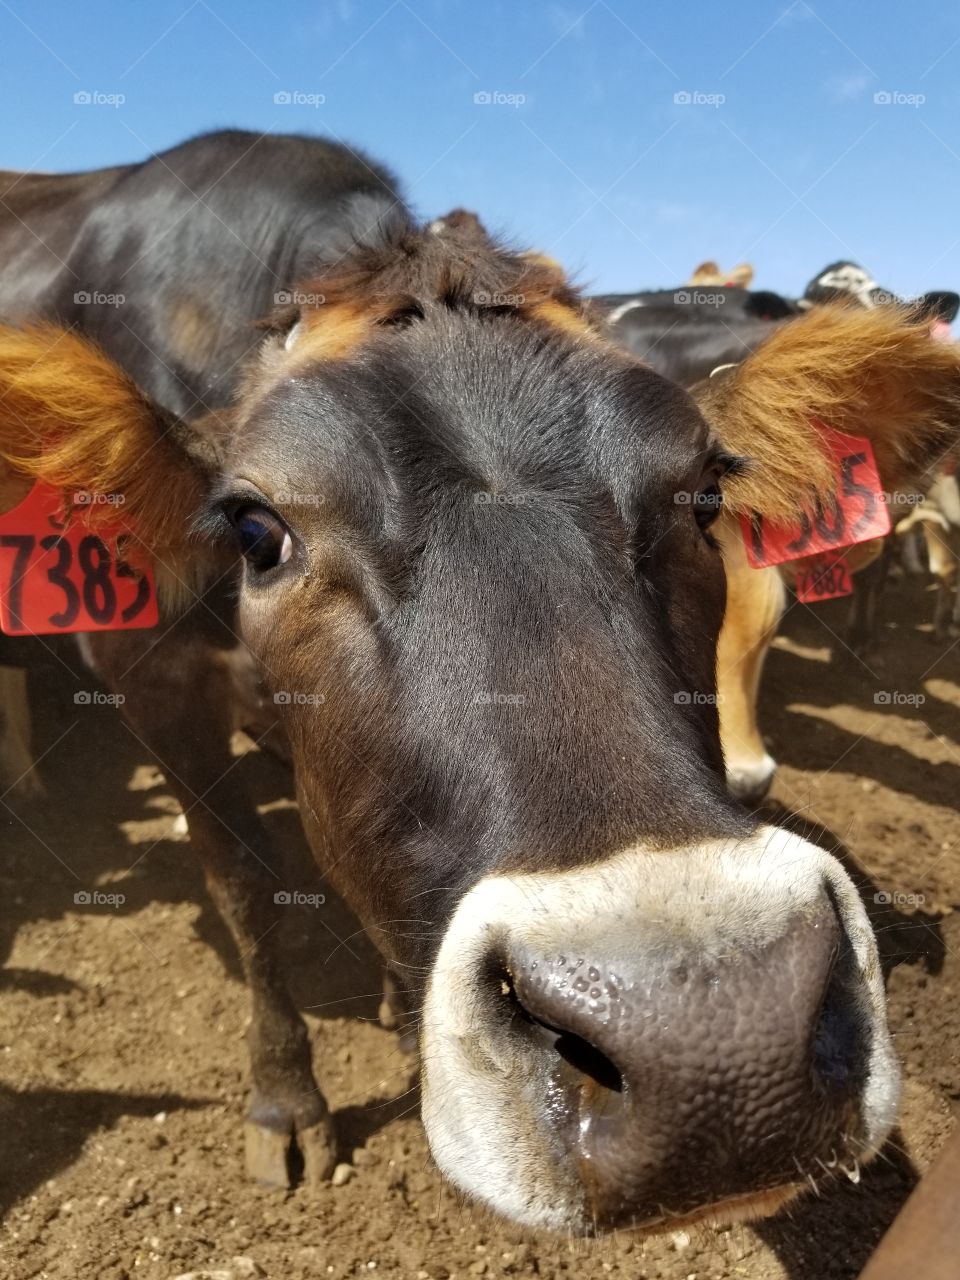 up close dairy cow